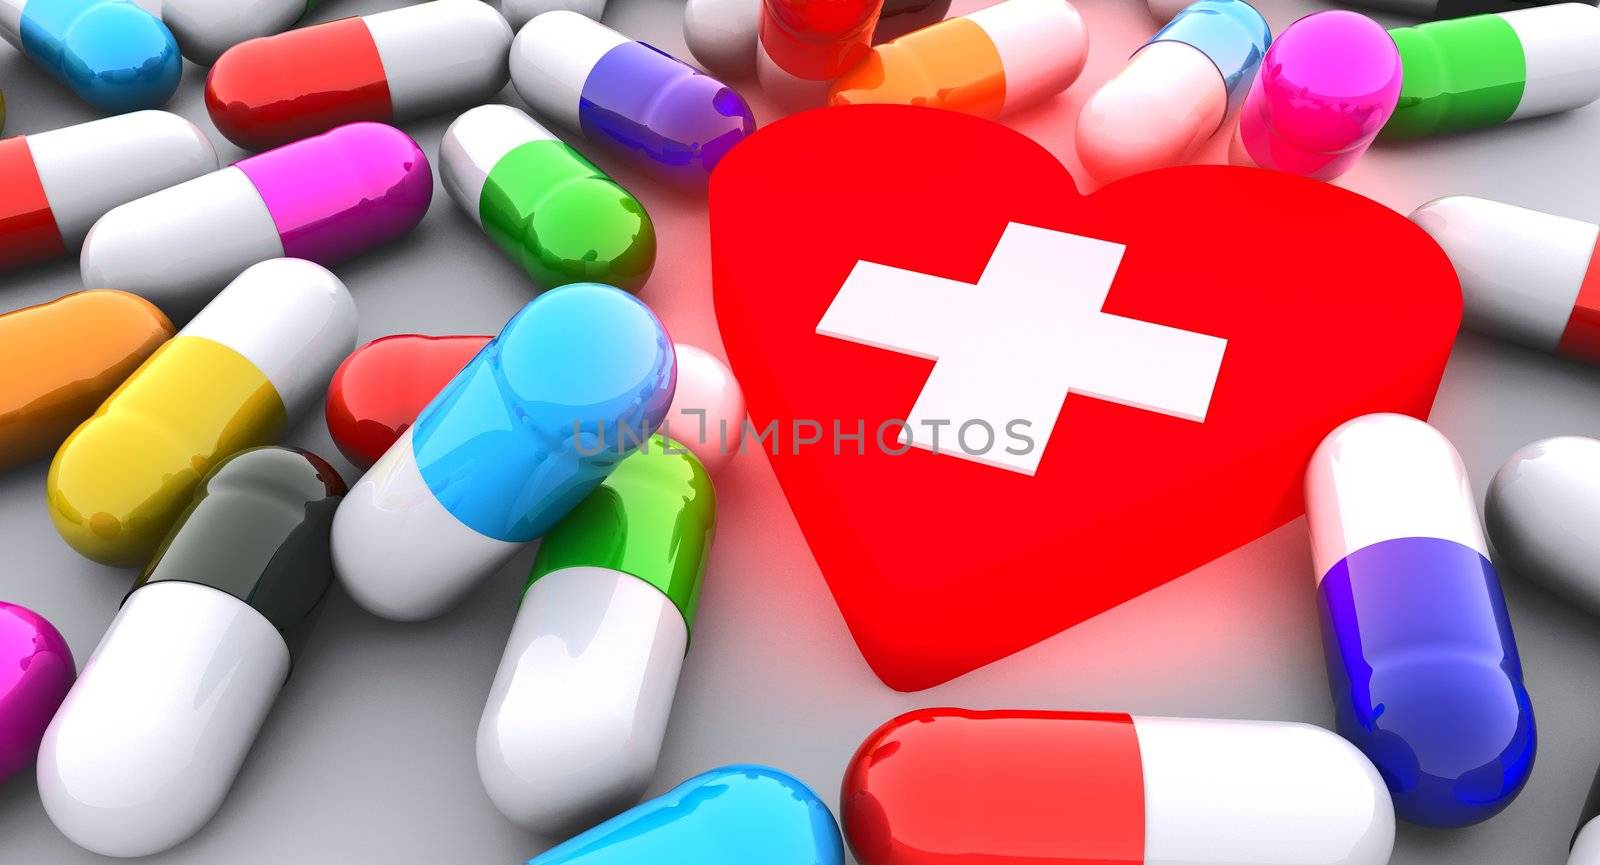 Concept of many pills and red glowing heart on white background. Pills are in red, blue, green, yellow and orange colors.